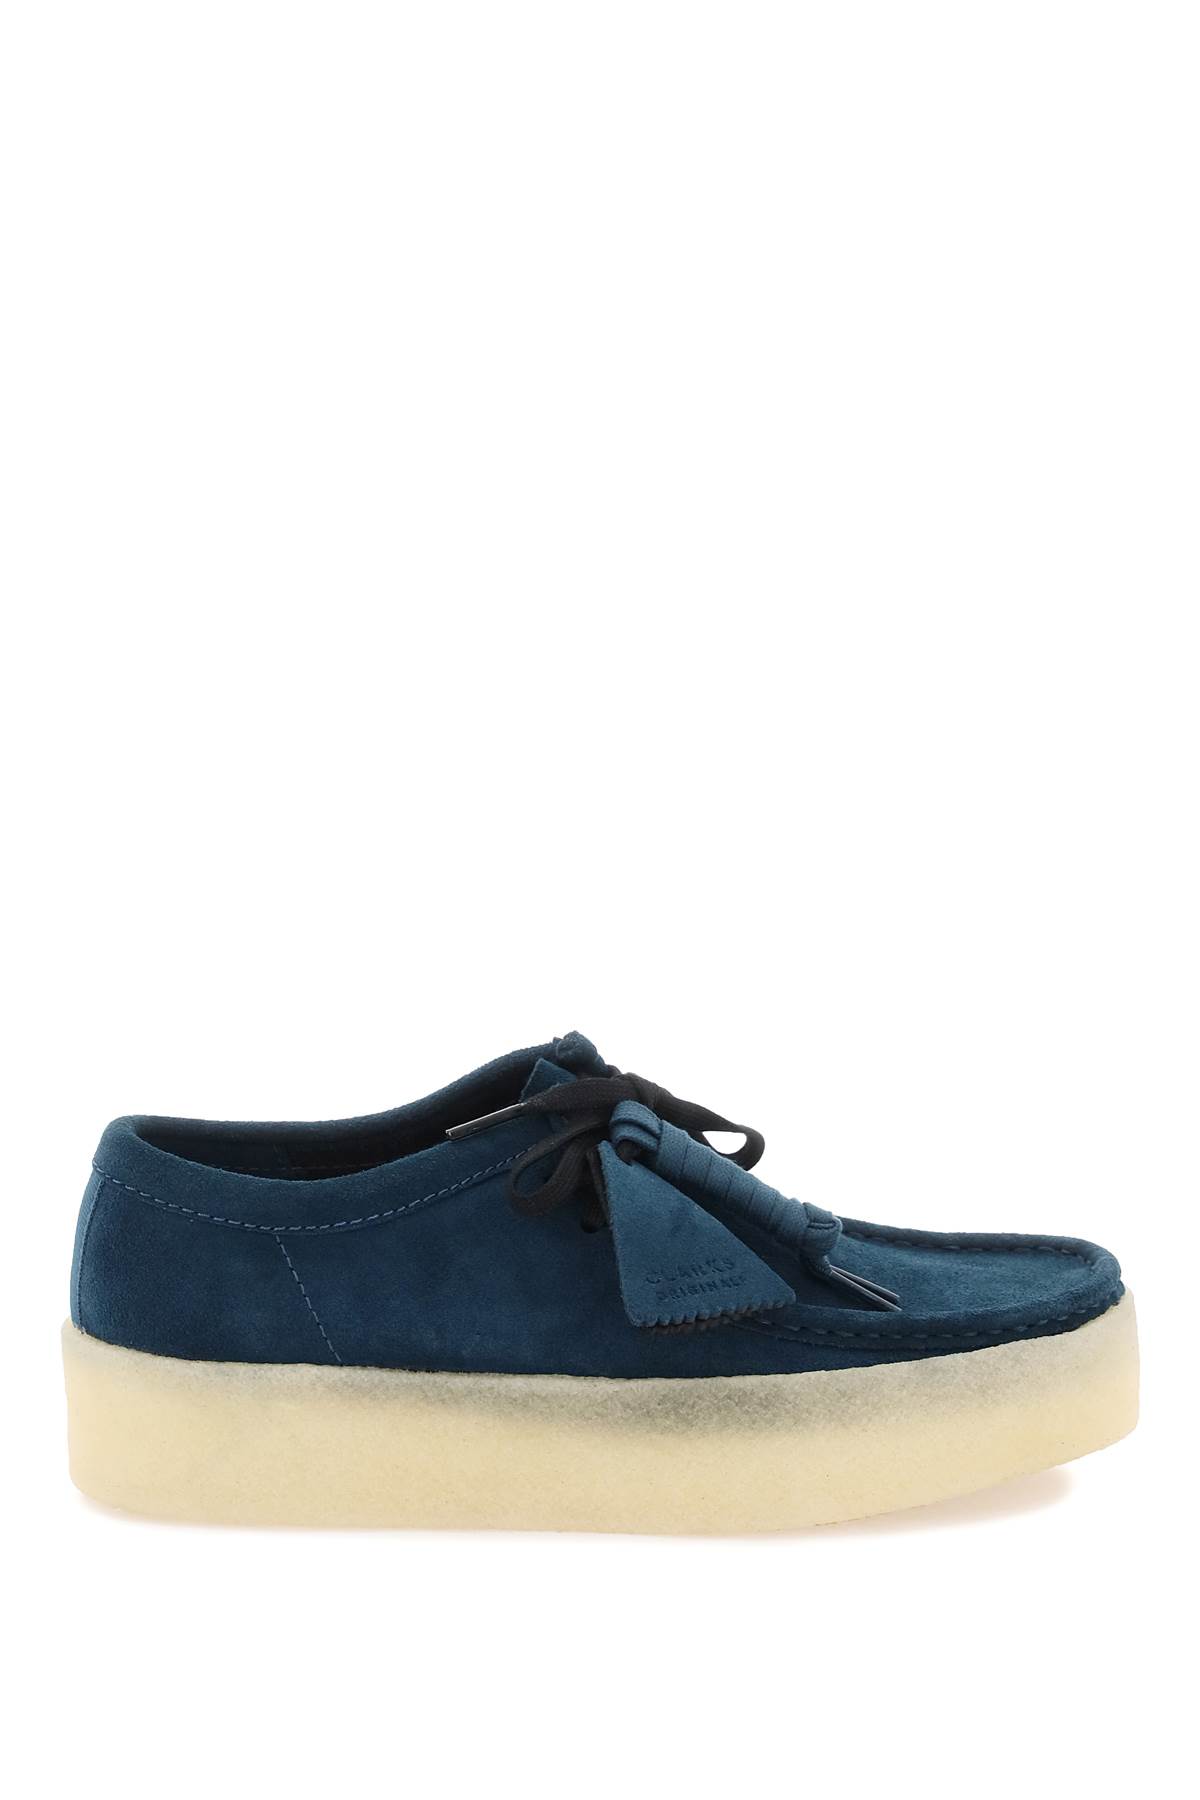 Shop Clarks Wallabee Cup Lace-up Shoes In Deep Blue (black)